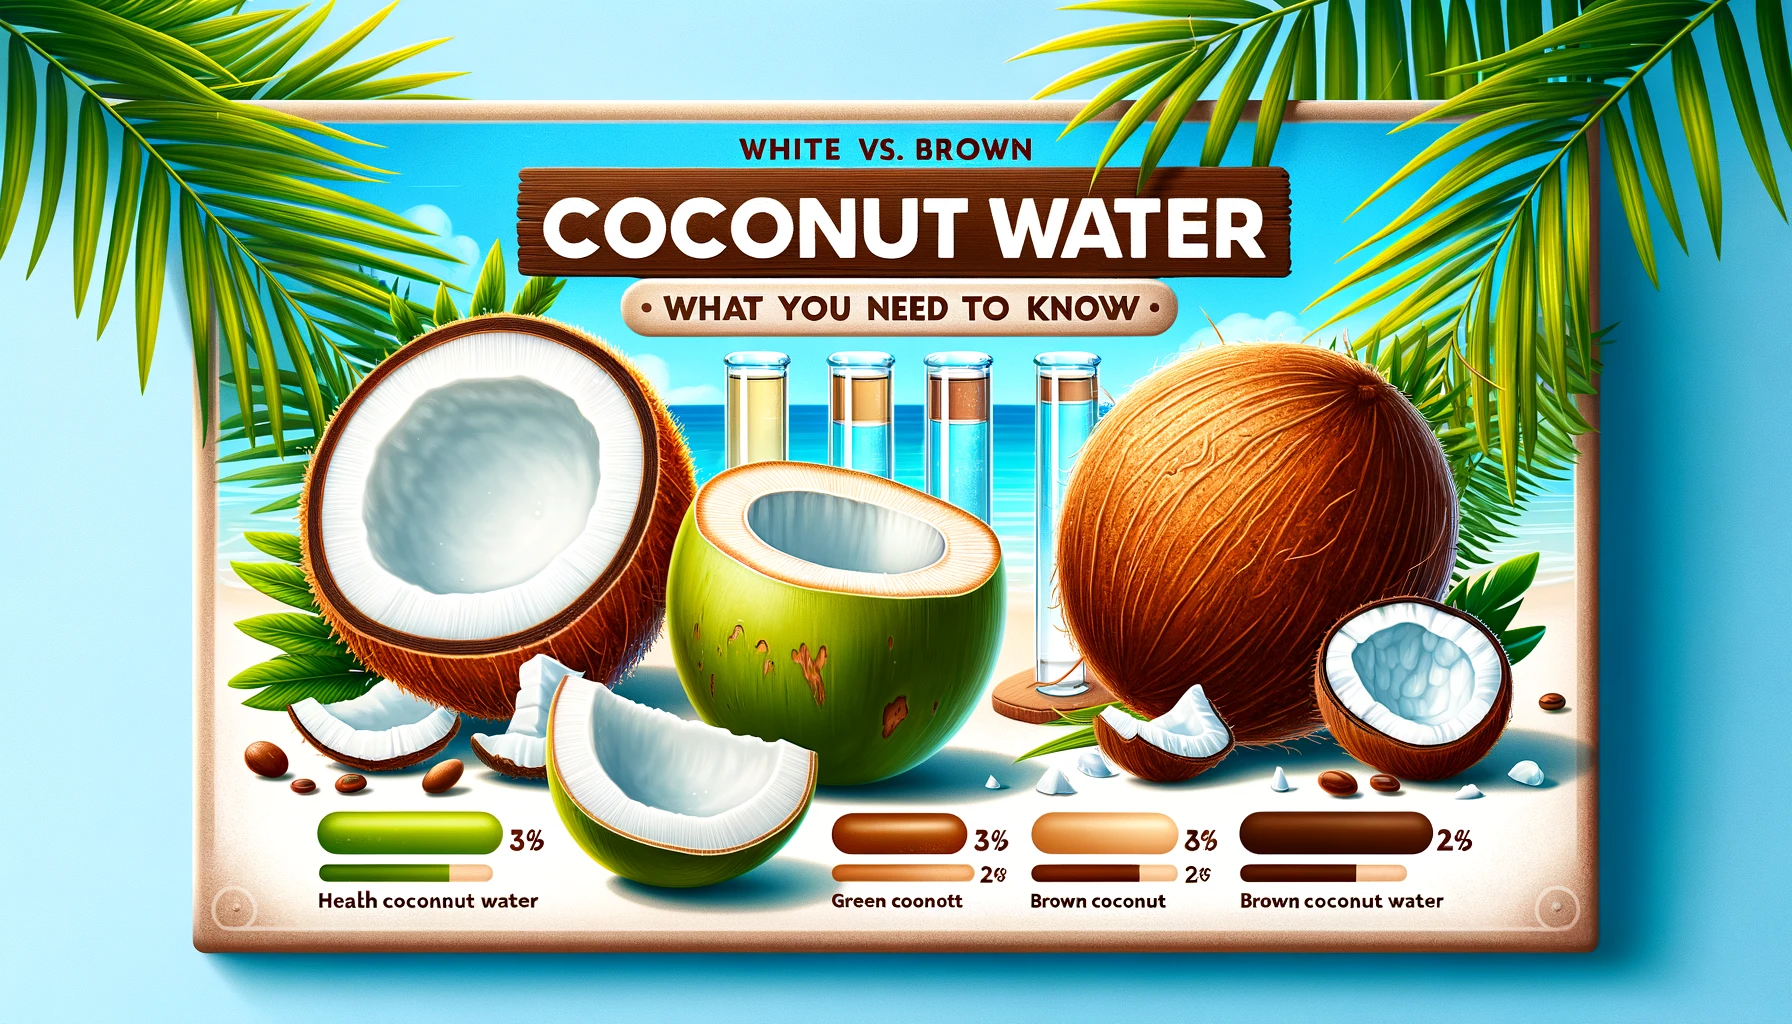 blog featured image about the comparison between white and brown coconut water